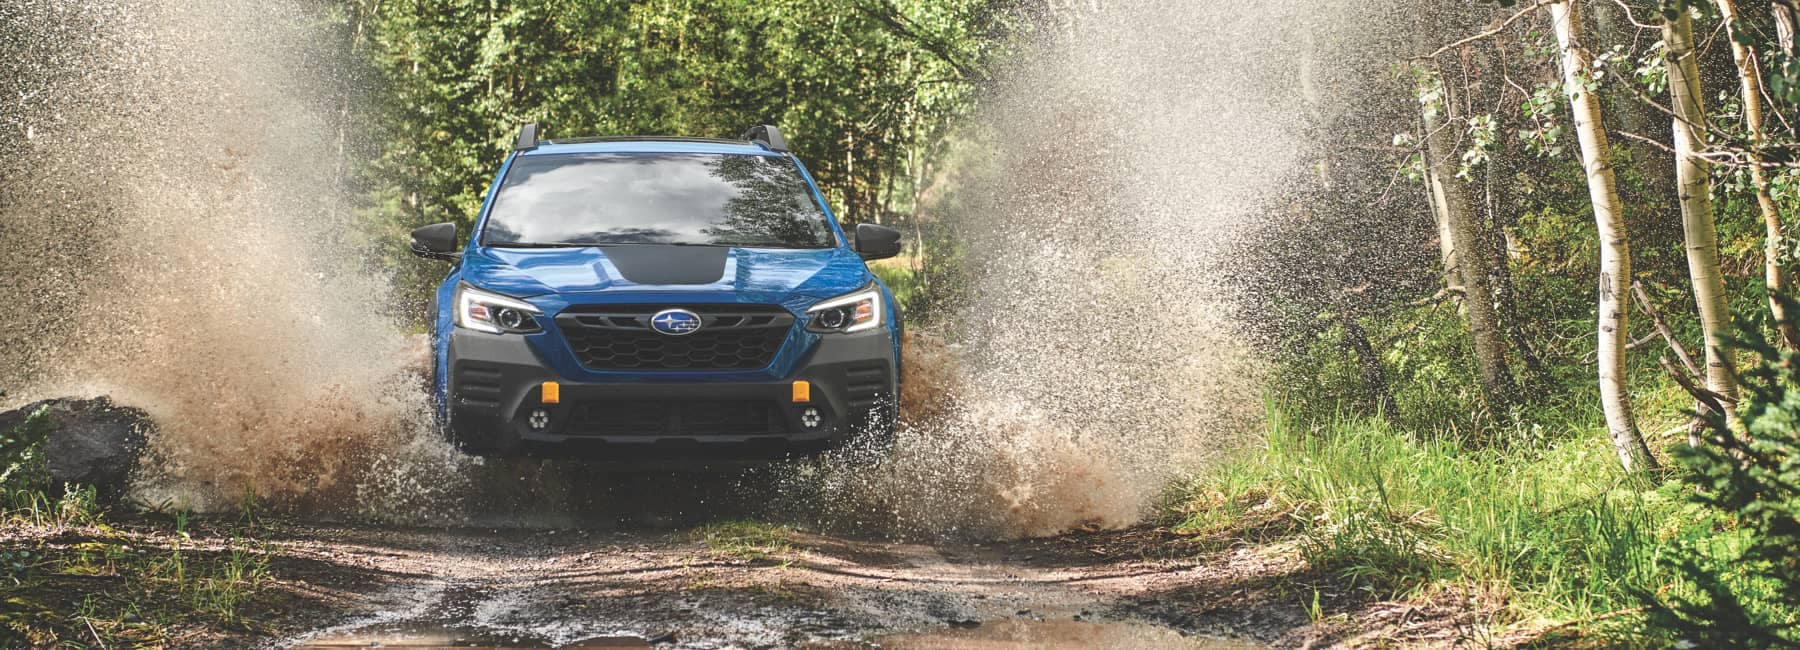 2022 Subaru Outback driving on a muddy road and spraying water